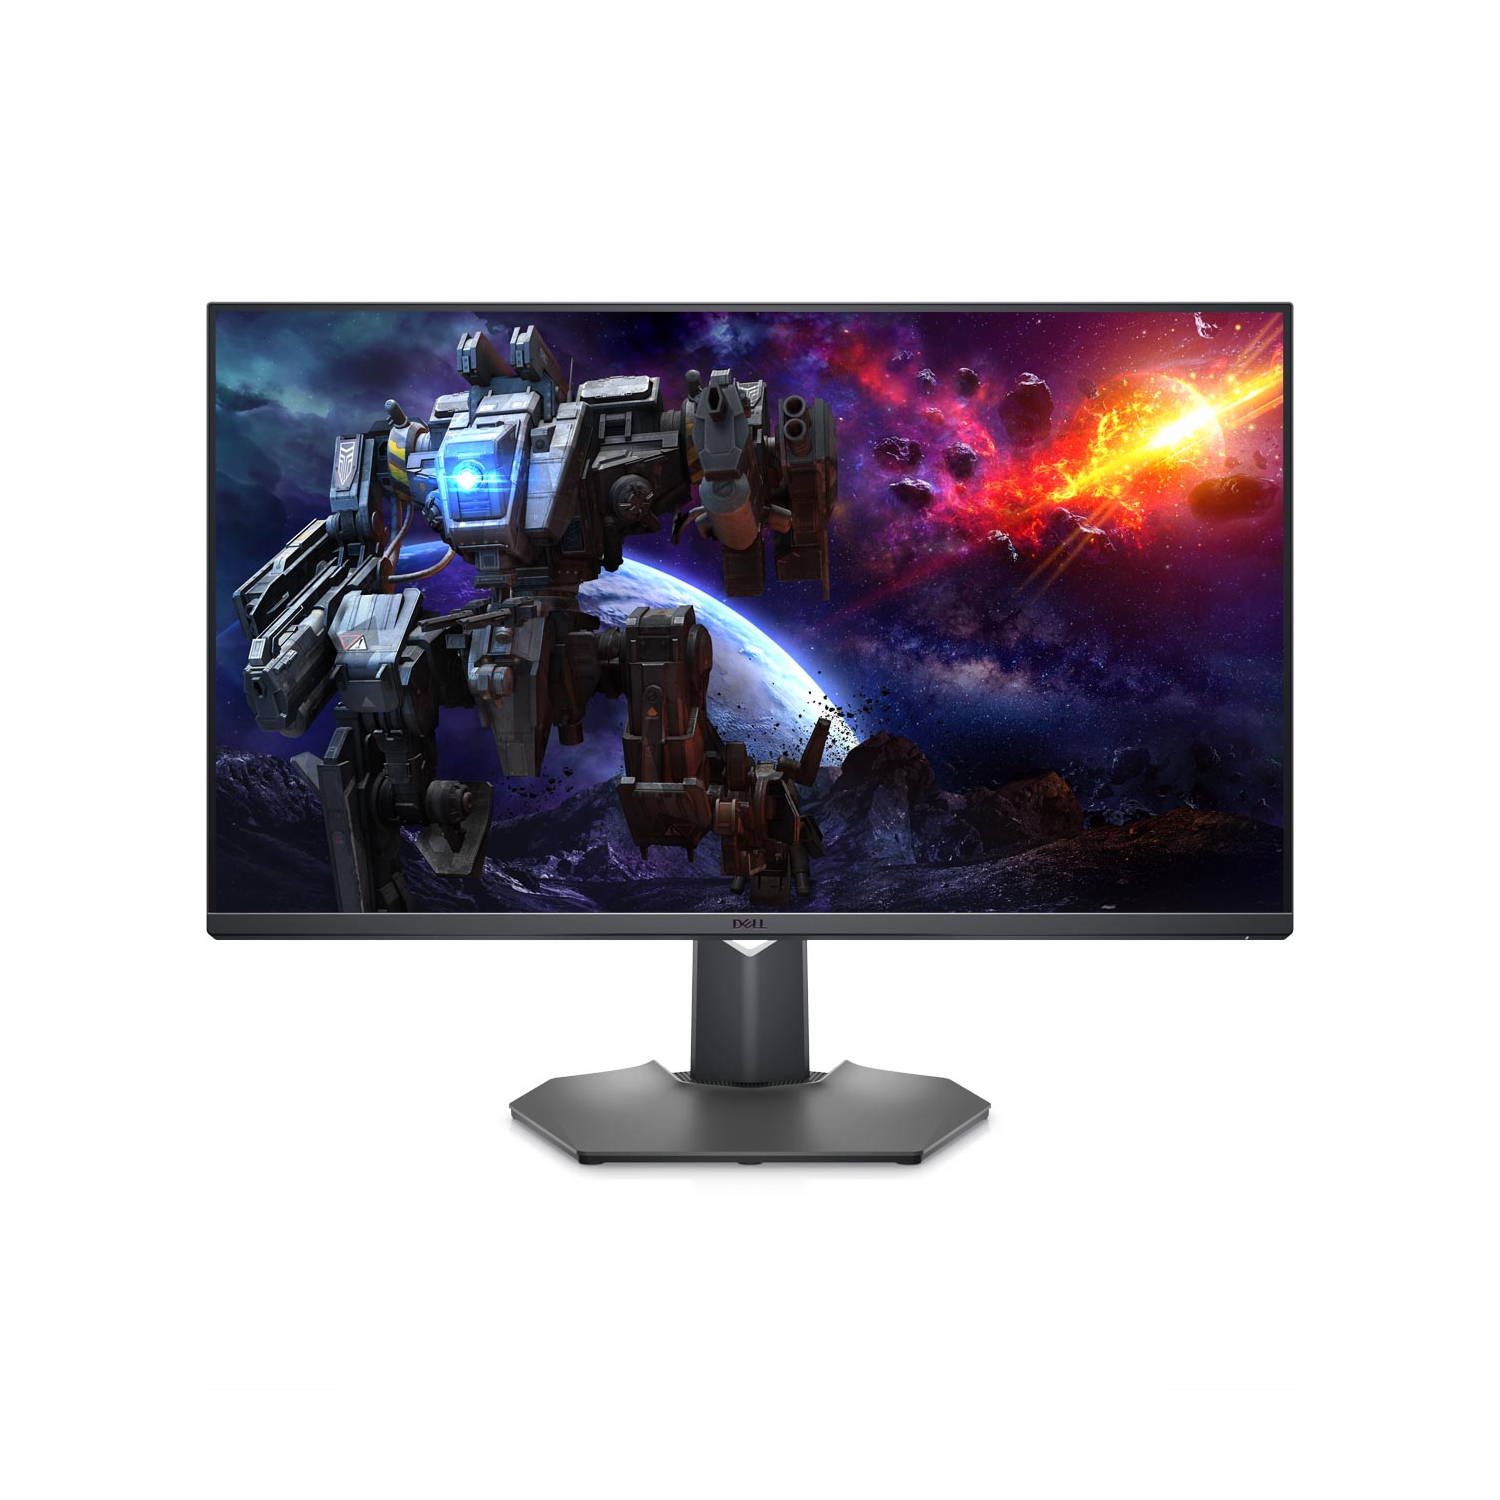 Dell 32 4K UHD Gaming Monitor with 144Hz Refresh Rate and 95% DCI-P3 Color Gamut